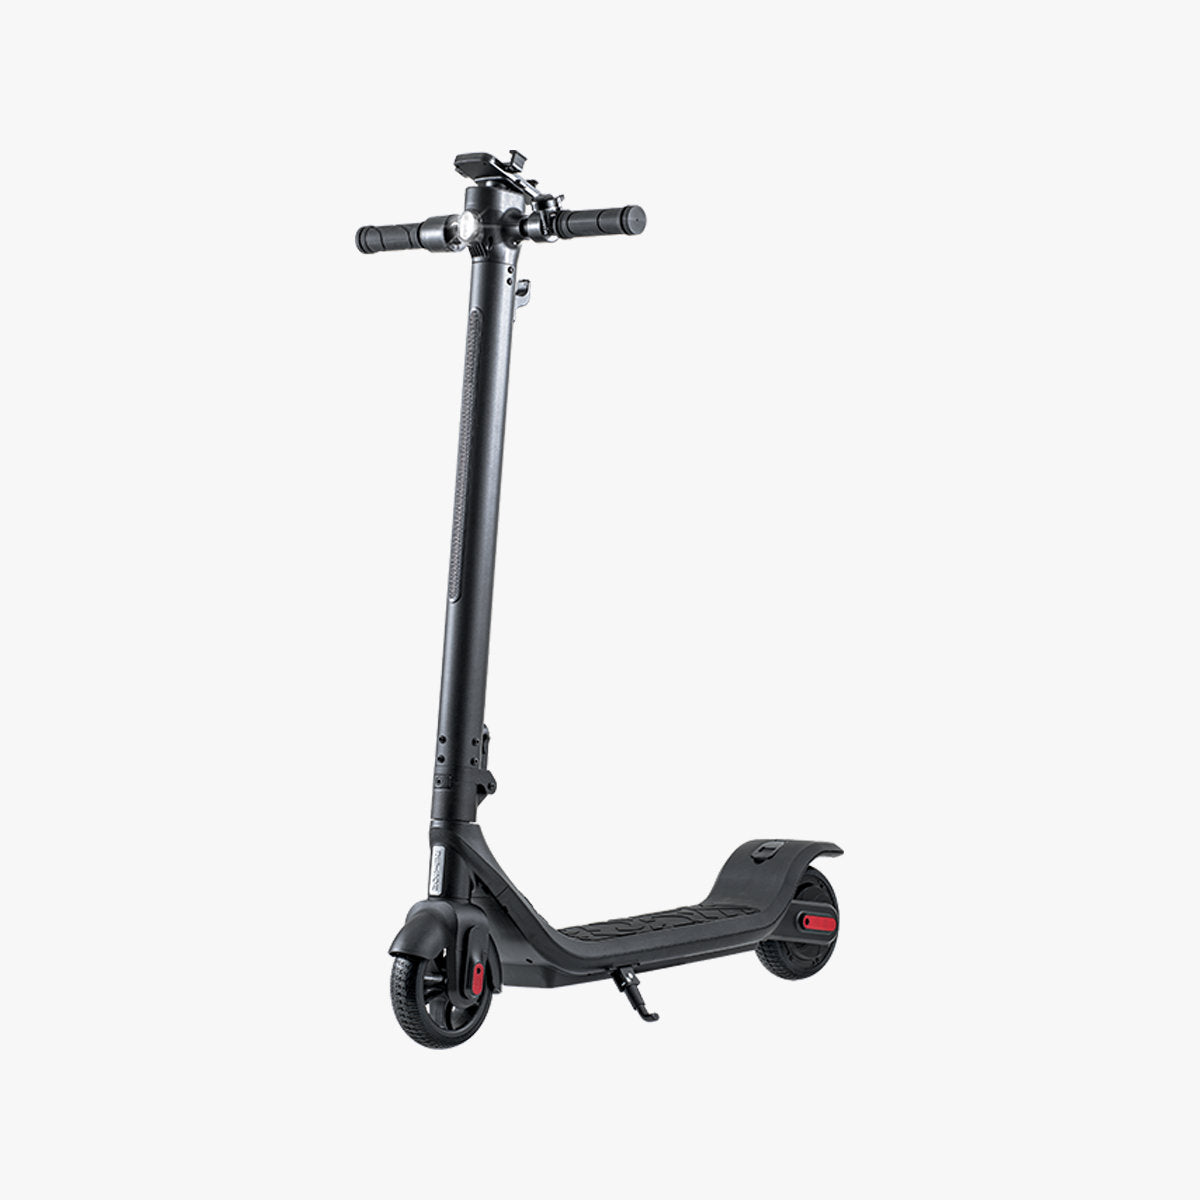 front view of the Rhythm e-scooter angled diagonally to the left with the kickstand down